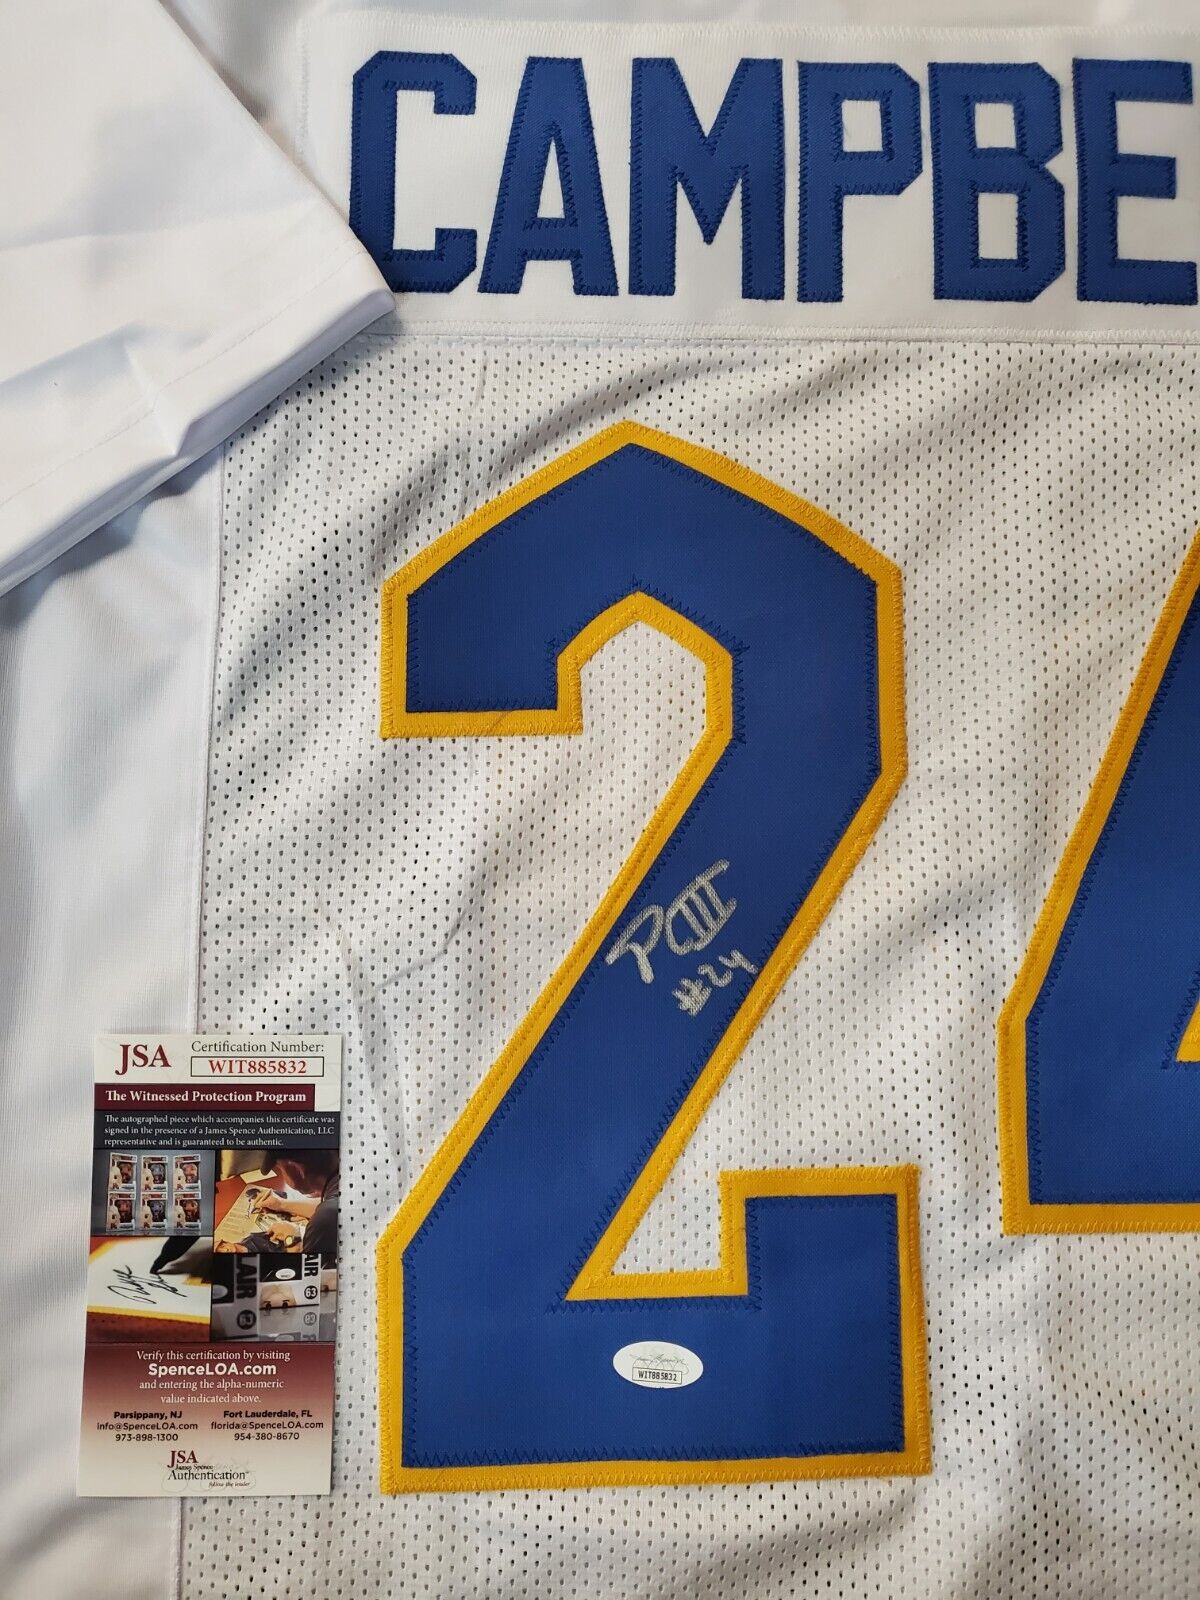 MVP Authentics Pitt Panthers Phil Campbell Iii Autographed Signed Jersey Jsa Coa 45 sports jersey framing , jersey framing